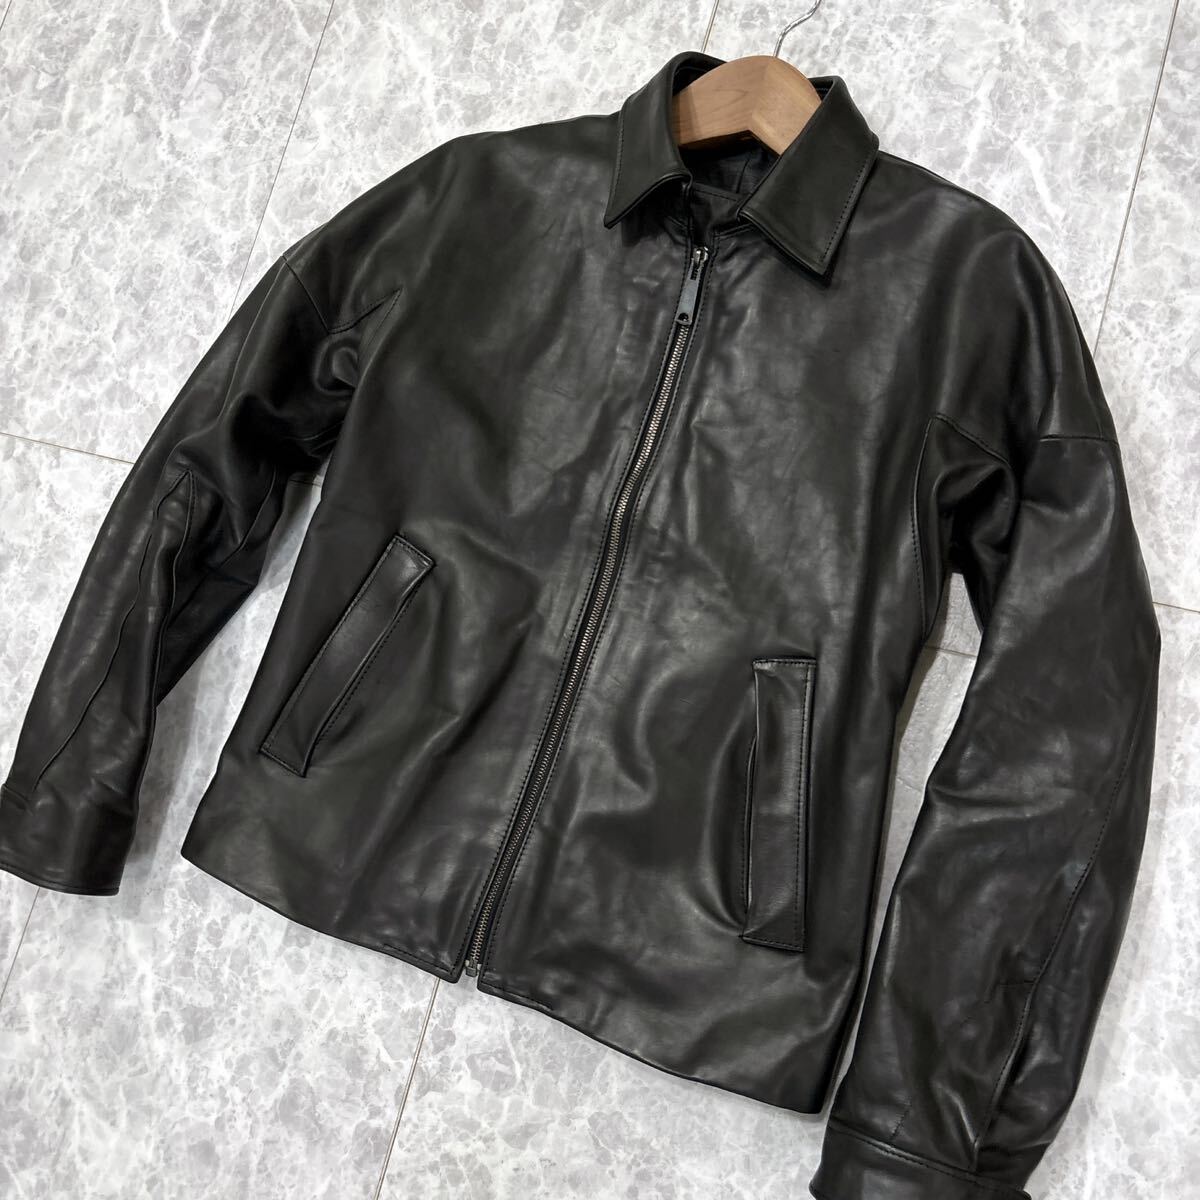 1 jpy ~ * finest quality LEATHER use \'.. excellent article \' ANSNAM Anne snamteleng original leather cow leather leather single rider's jacket size1 men's high class gentleman clothes 